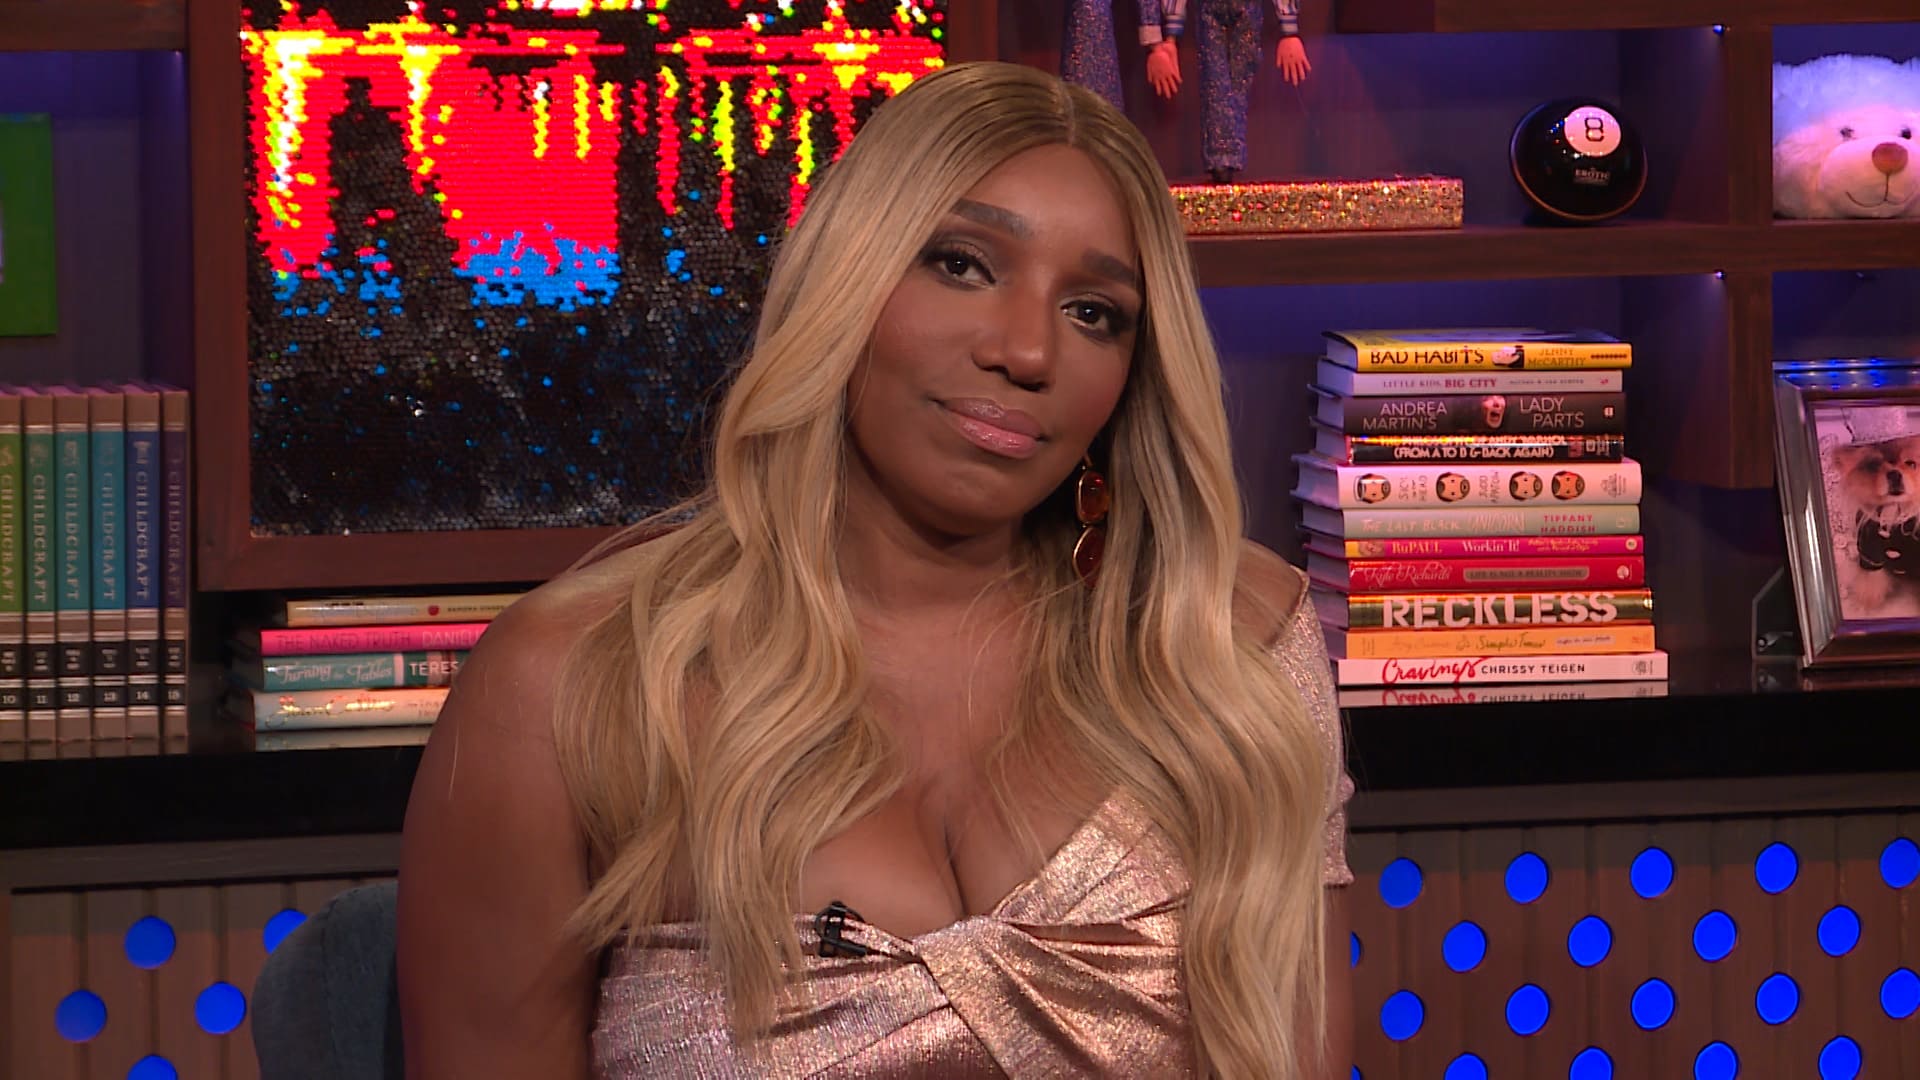 NeNe Leakes' Fans Are Grateful To Her For Teaching Them How To 'Turn Tragedy Into Triumph' - See NeNe's Video